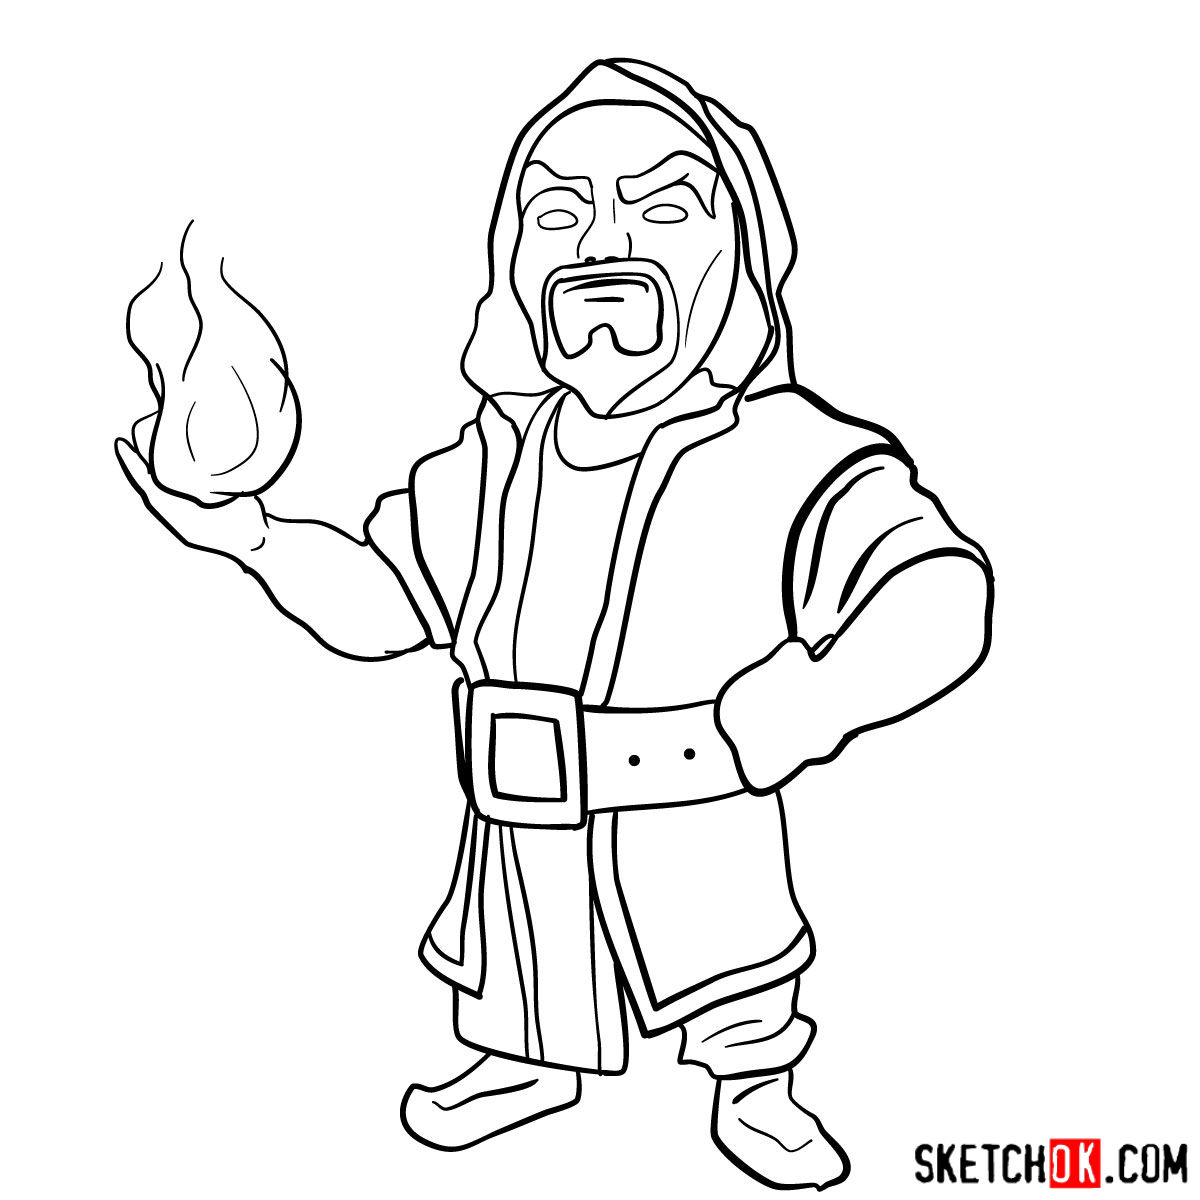 Giant Clash of Clans Coloring Page for Kids - Free Clash of the Clans  Printable Coloring Pages Online for Kids - ColoringPages101.com | Coloring  Pages for Kids